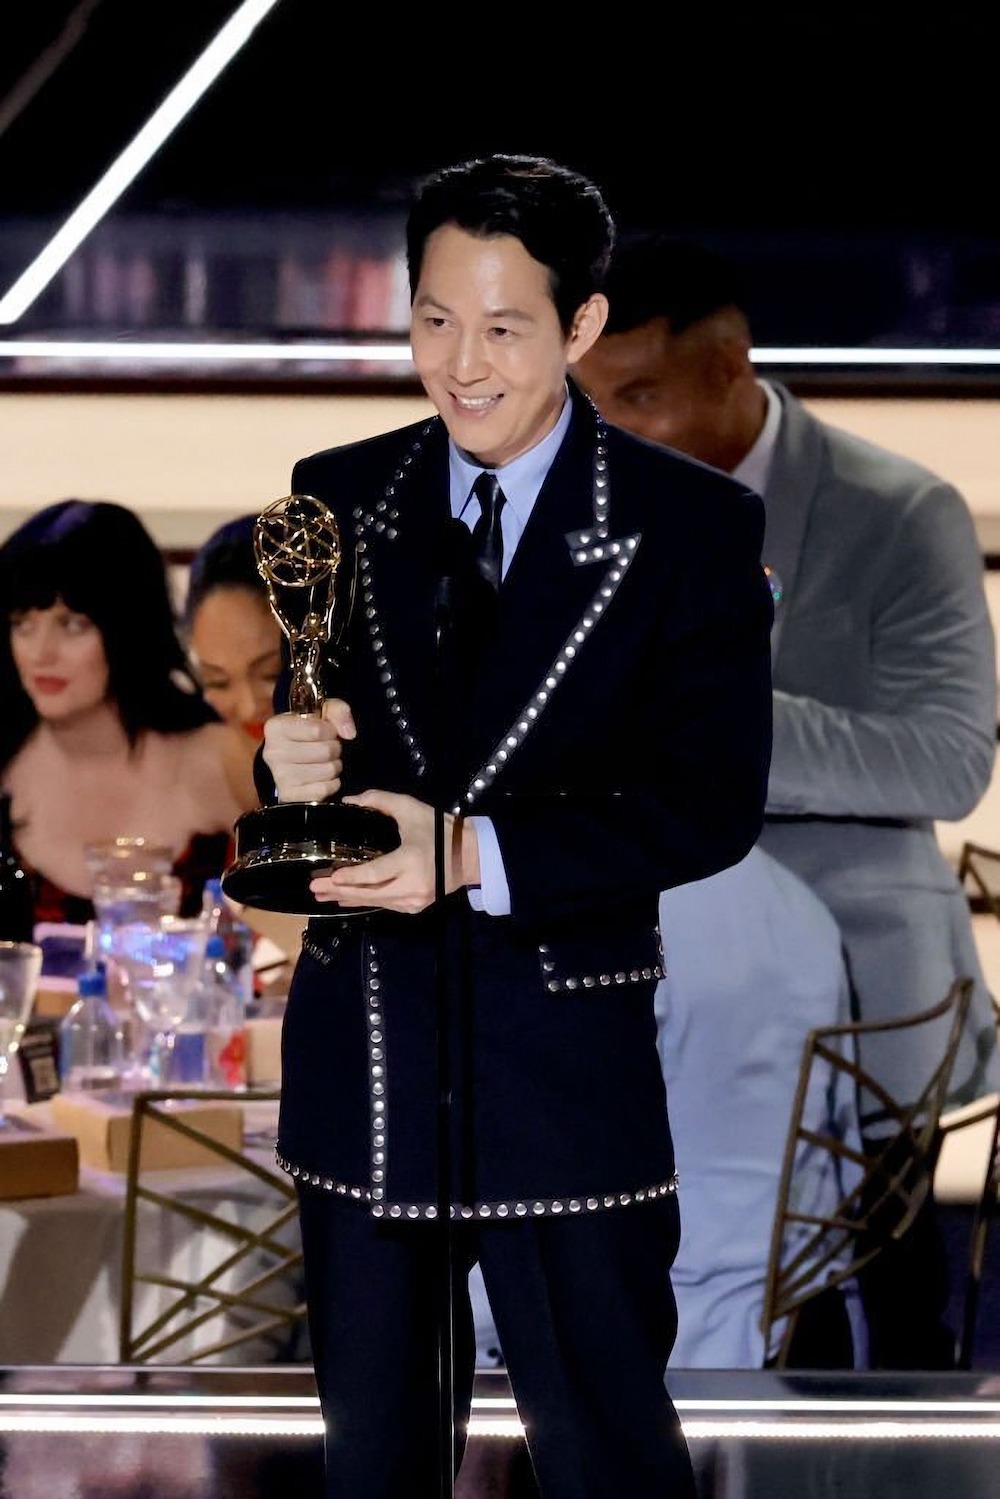 Lee Jung-jae won 'Outstanding Lead Actor in a Drama Series' for Squid Game onstage at the 2022 Emmy Awards.